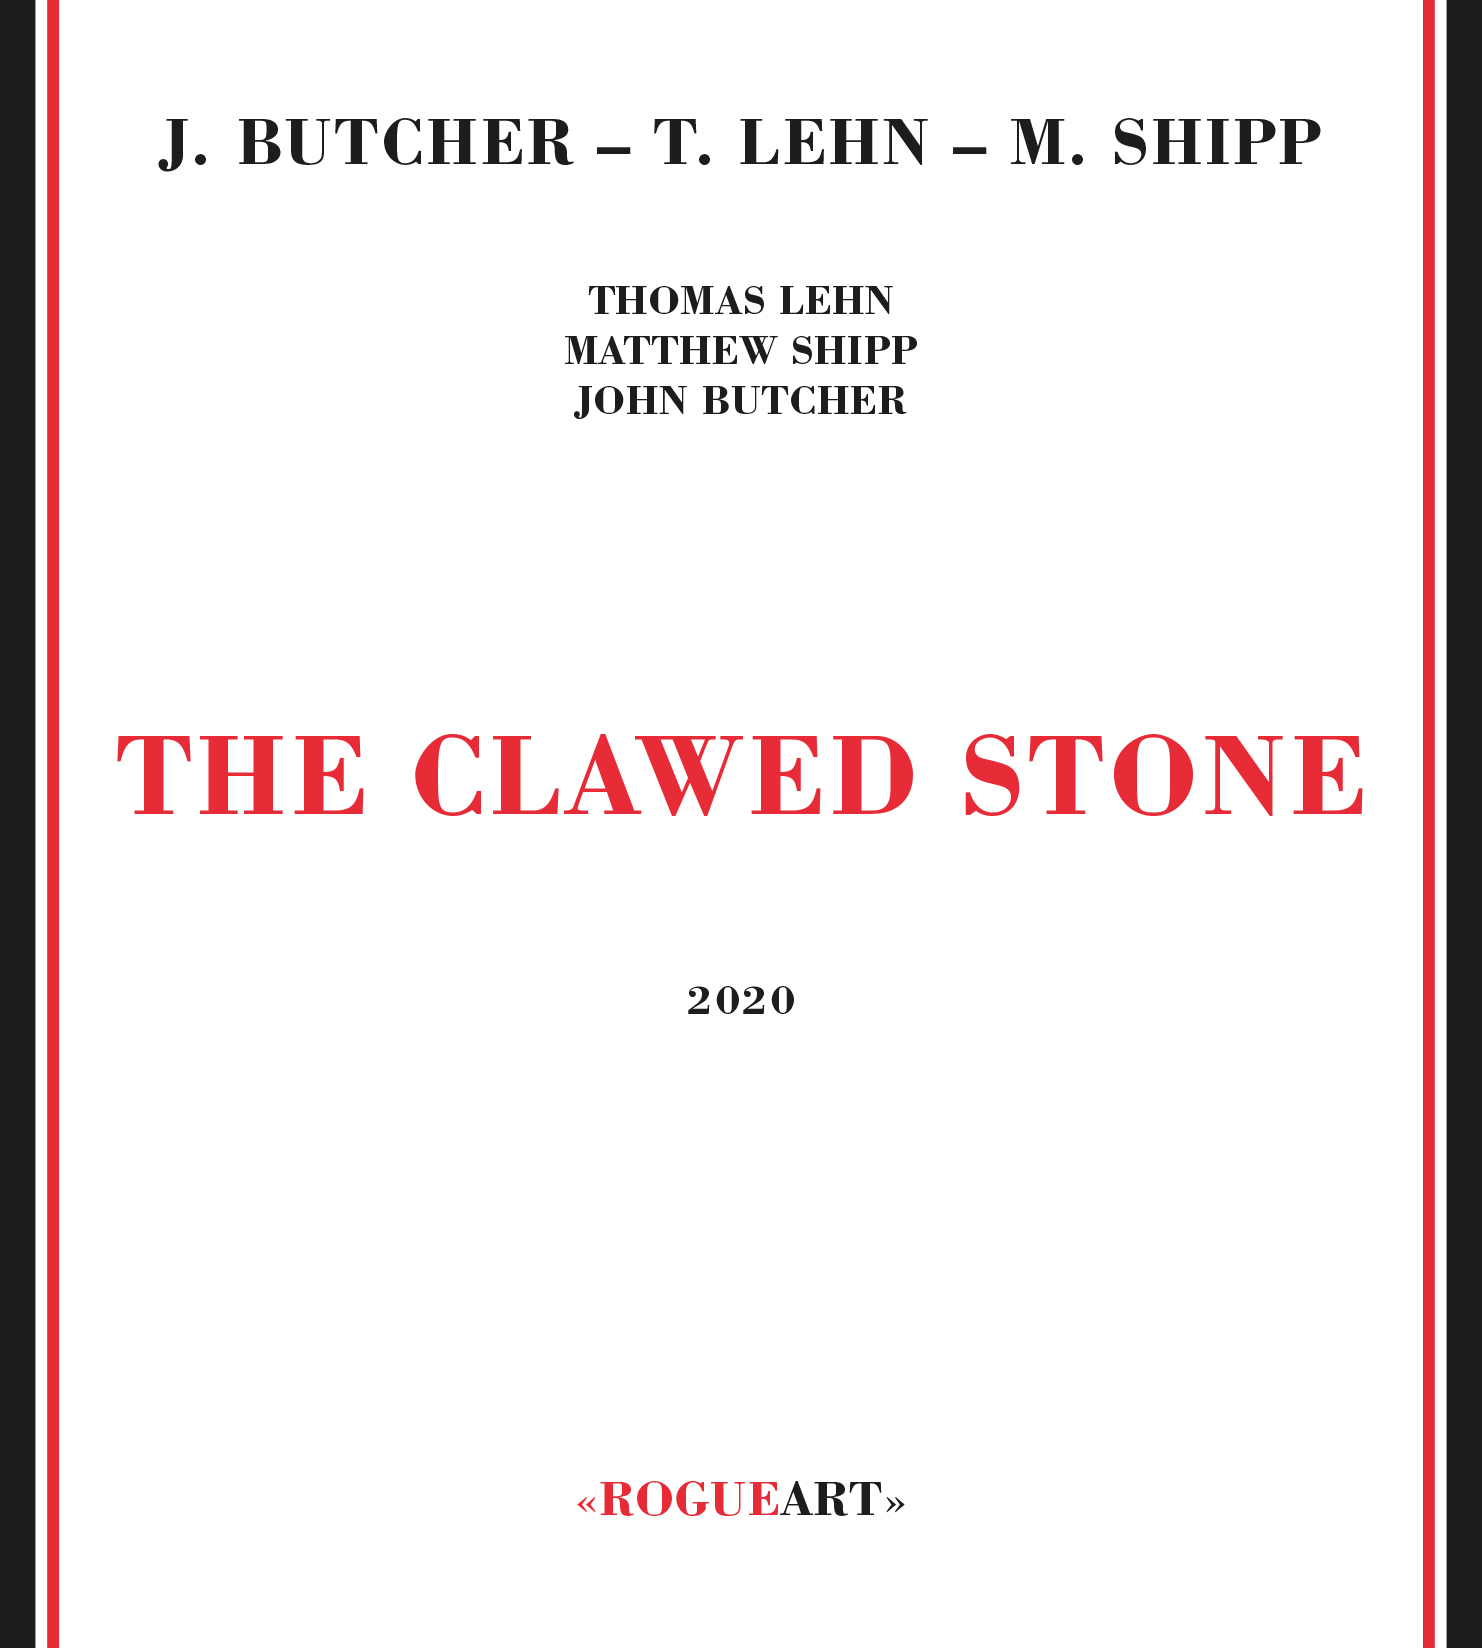 THE CLAWED STONE